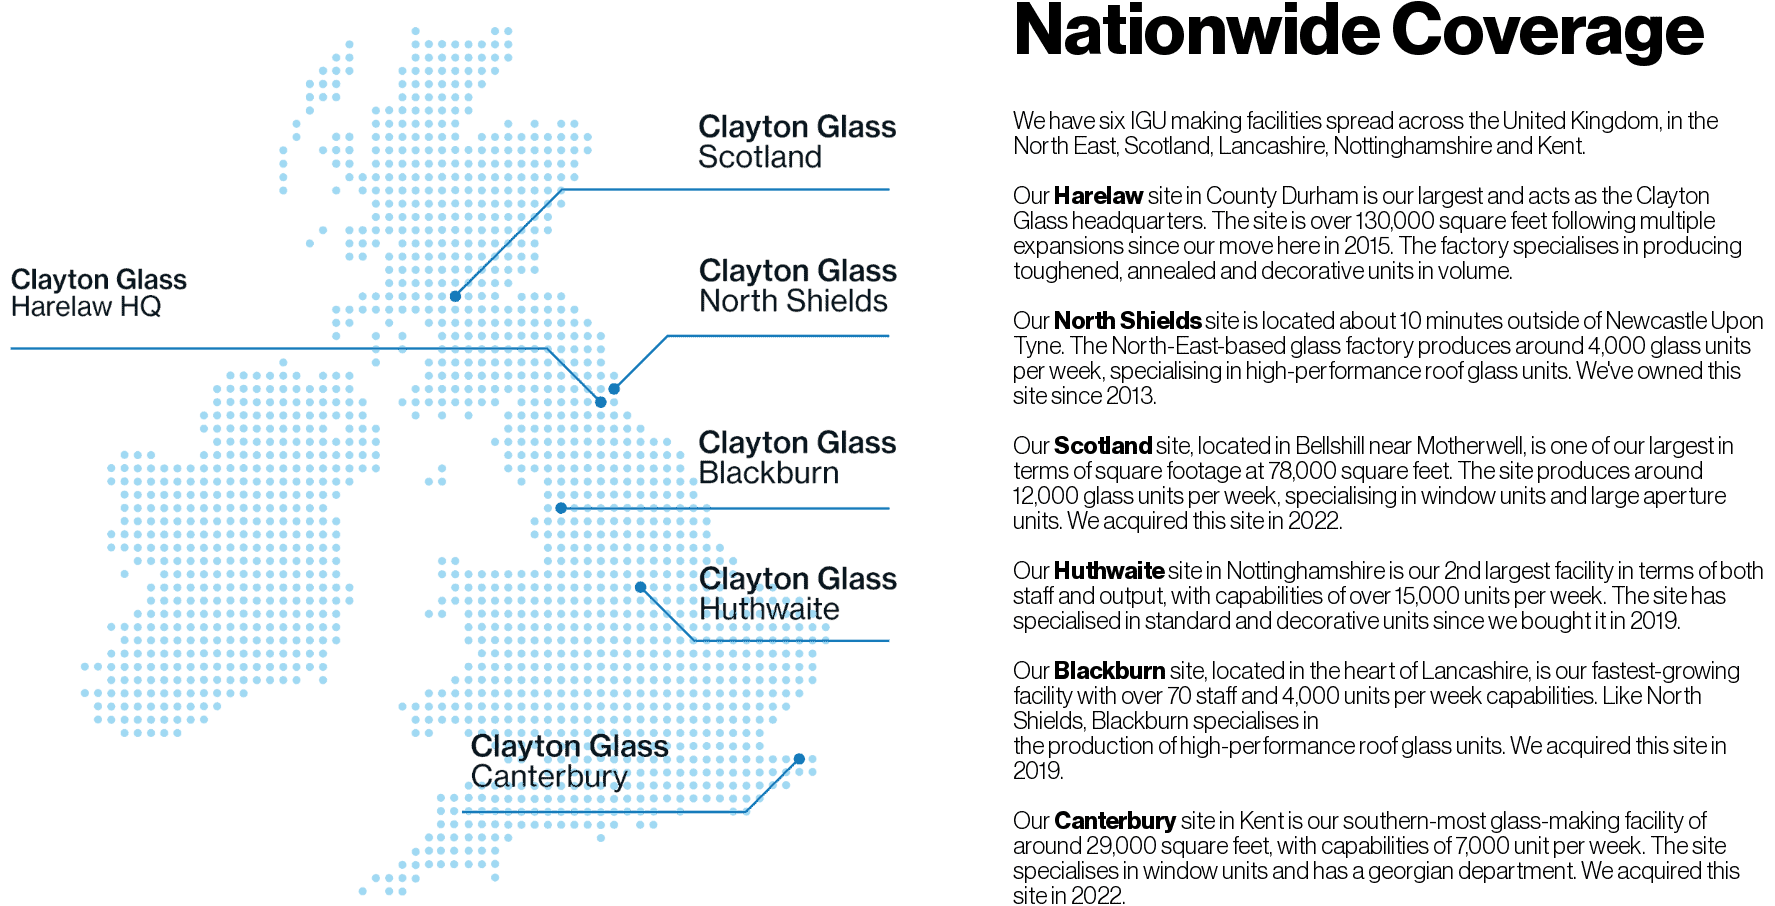 An image emphasising Clayton Glass' nationwide coverage, showing our six sites in Harelaw, North Shields, Scotland, Huthwaite, Blackburn and Canterbury.